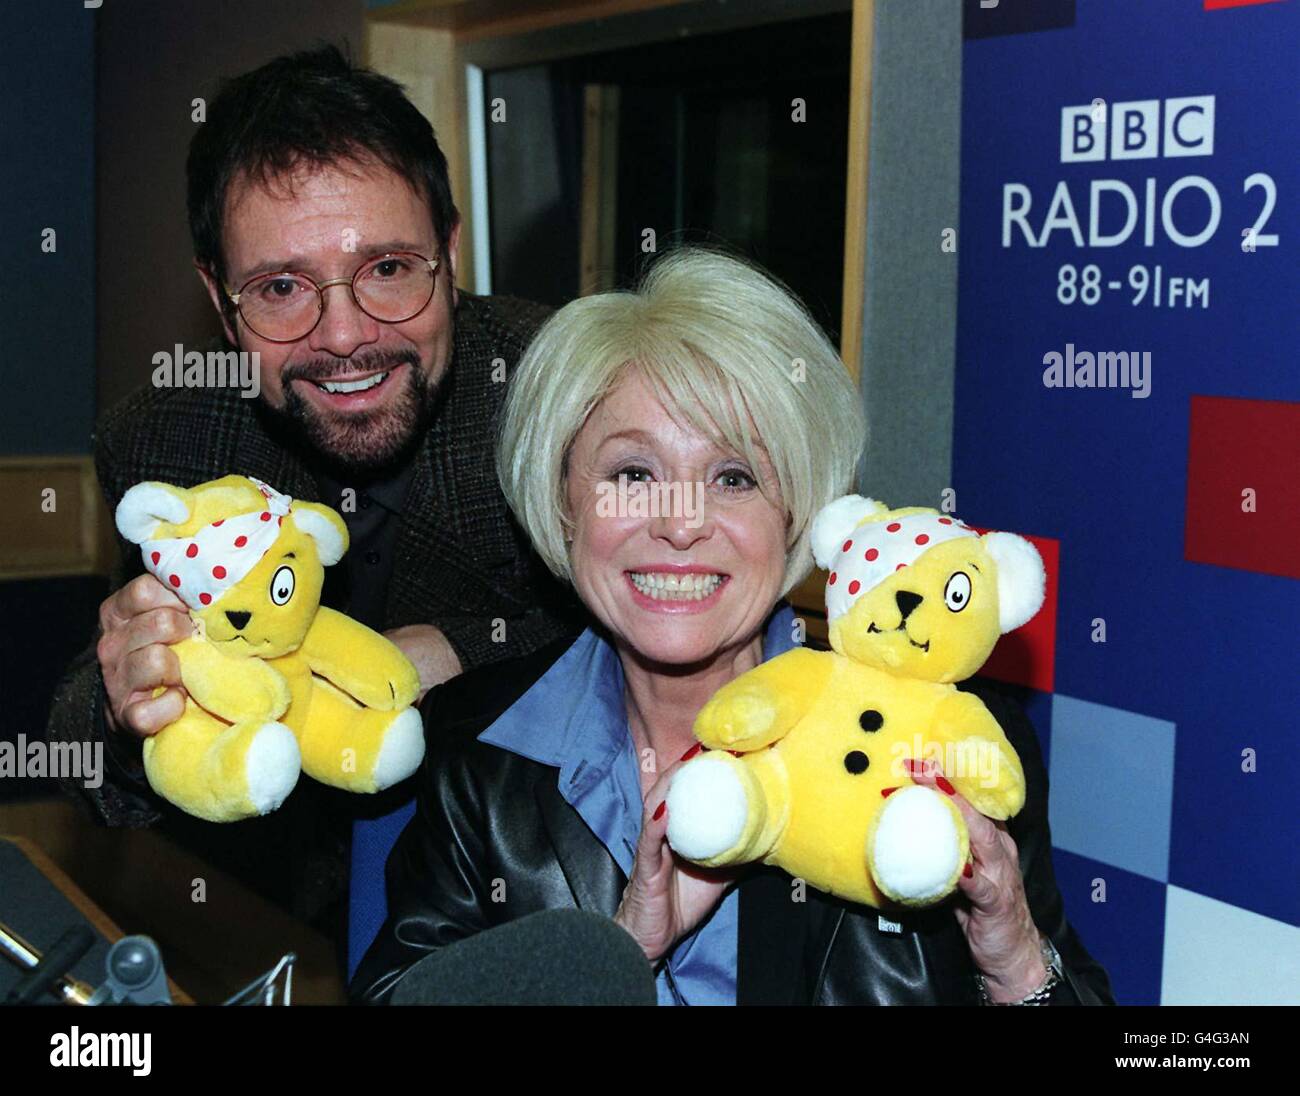 Singer Sir Cliff Richard and actress Barbara Windsor at Broadcasting House in London today (Friday) as this year's Children In Need appeal gets under way. Photo by Peter J Jordan/PA Stock Photo